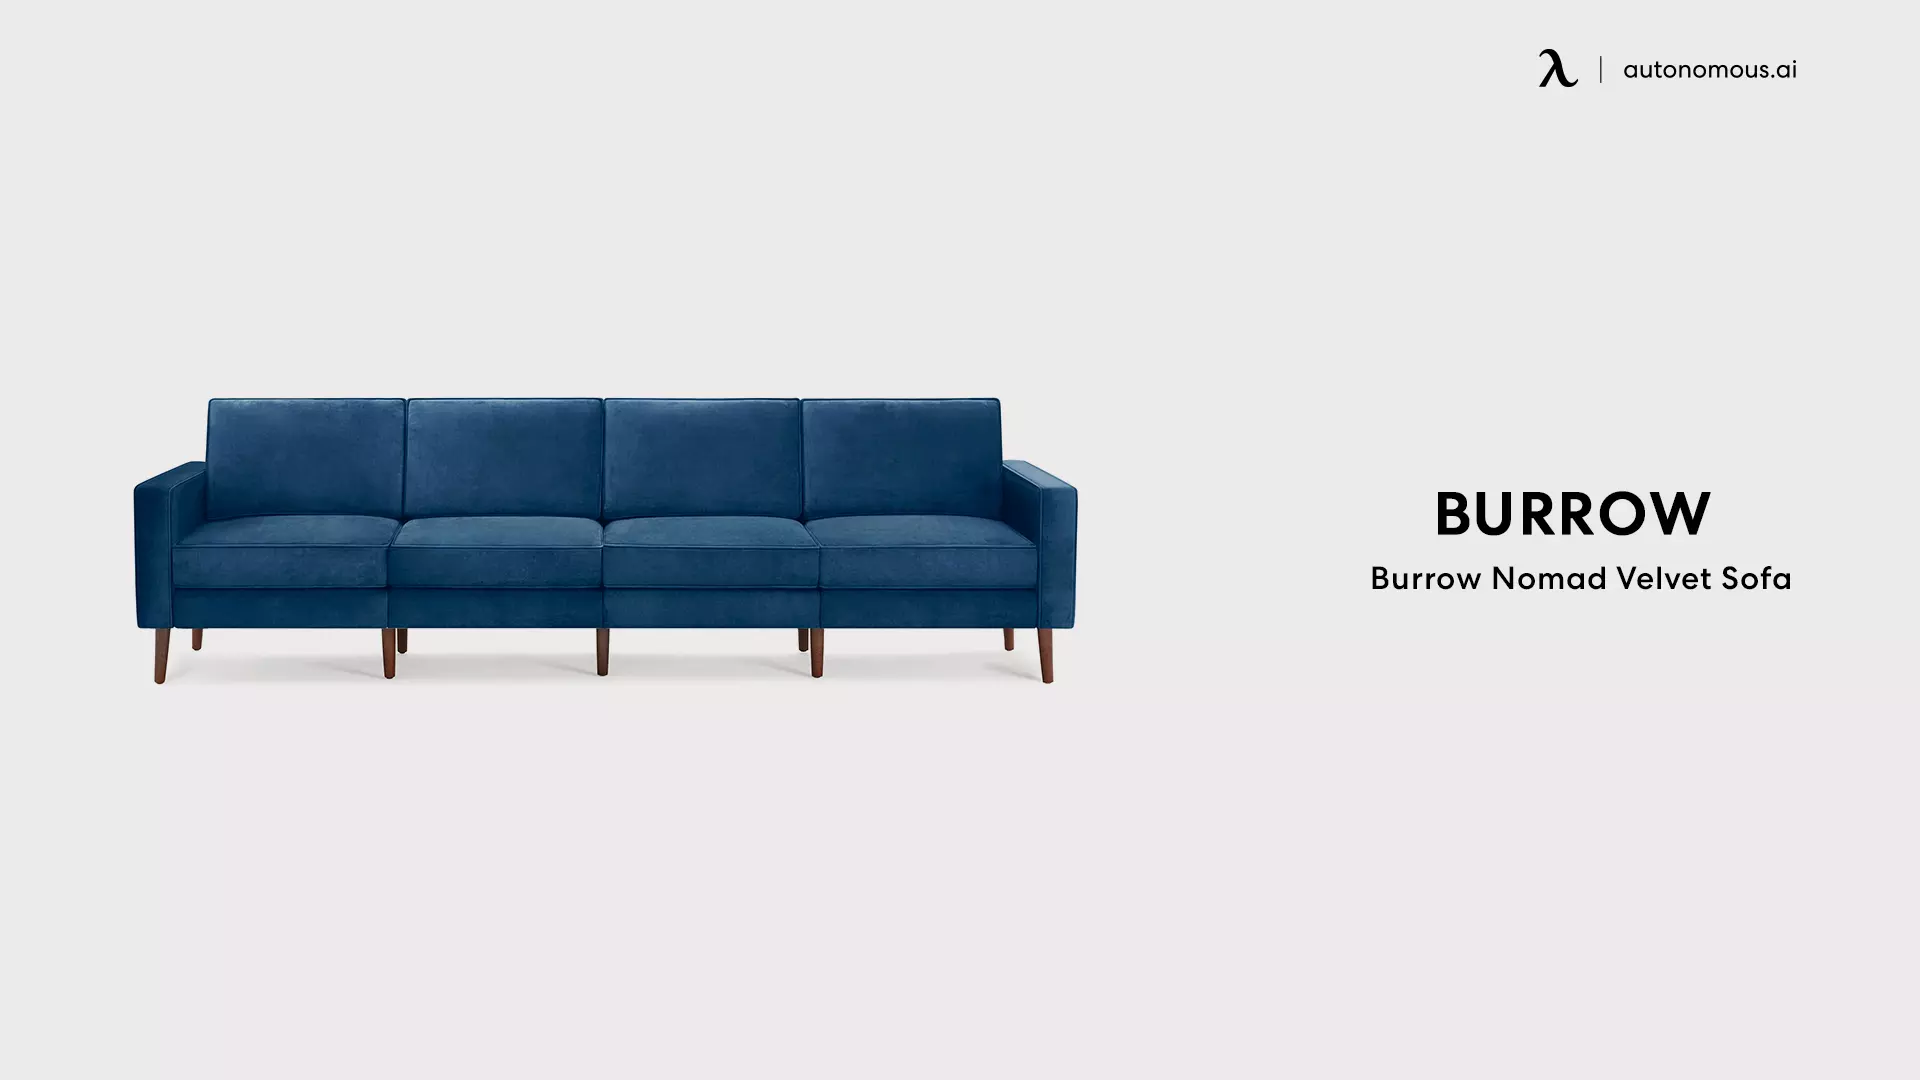 Burrow Nomad Velvet Sofa - small office couch